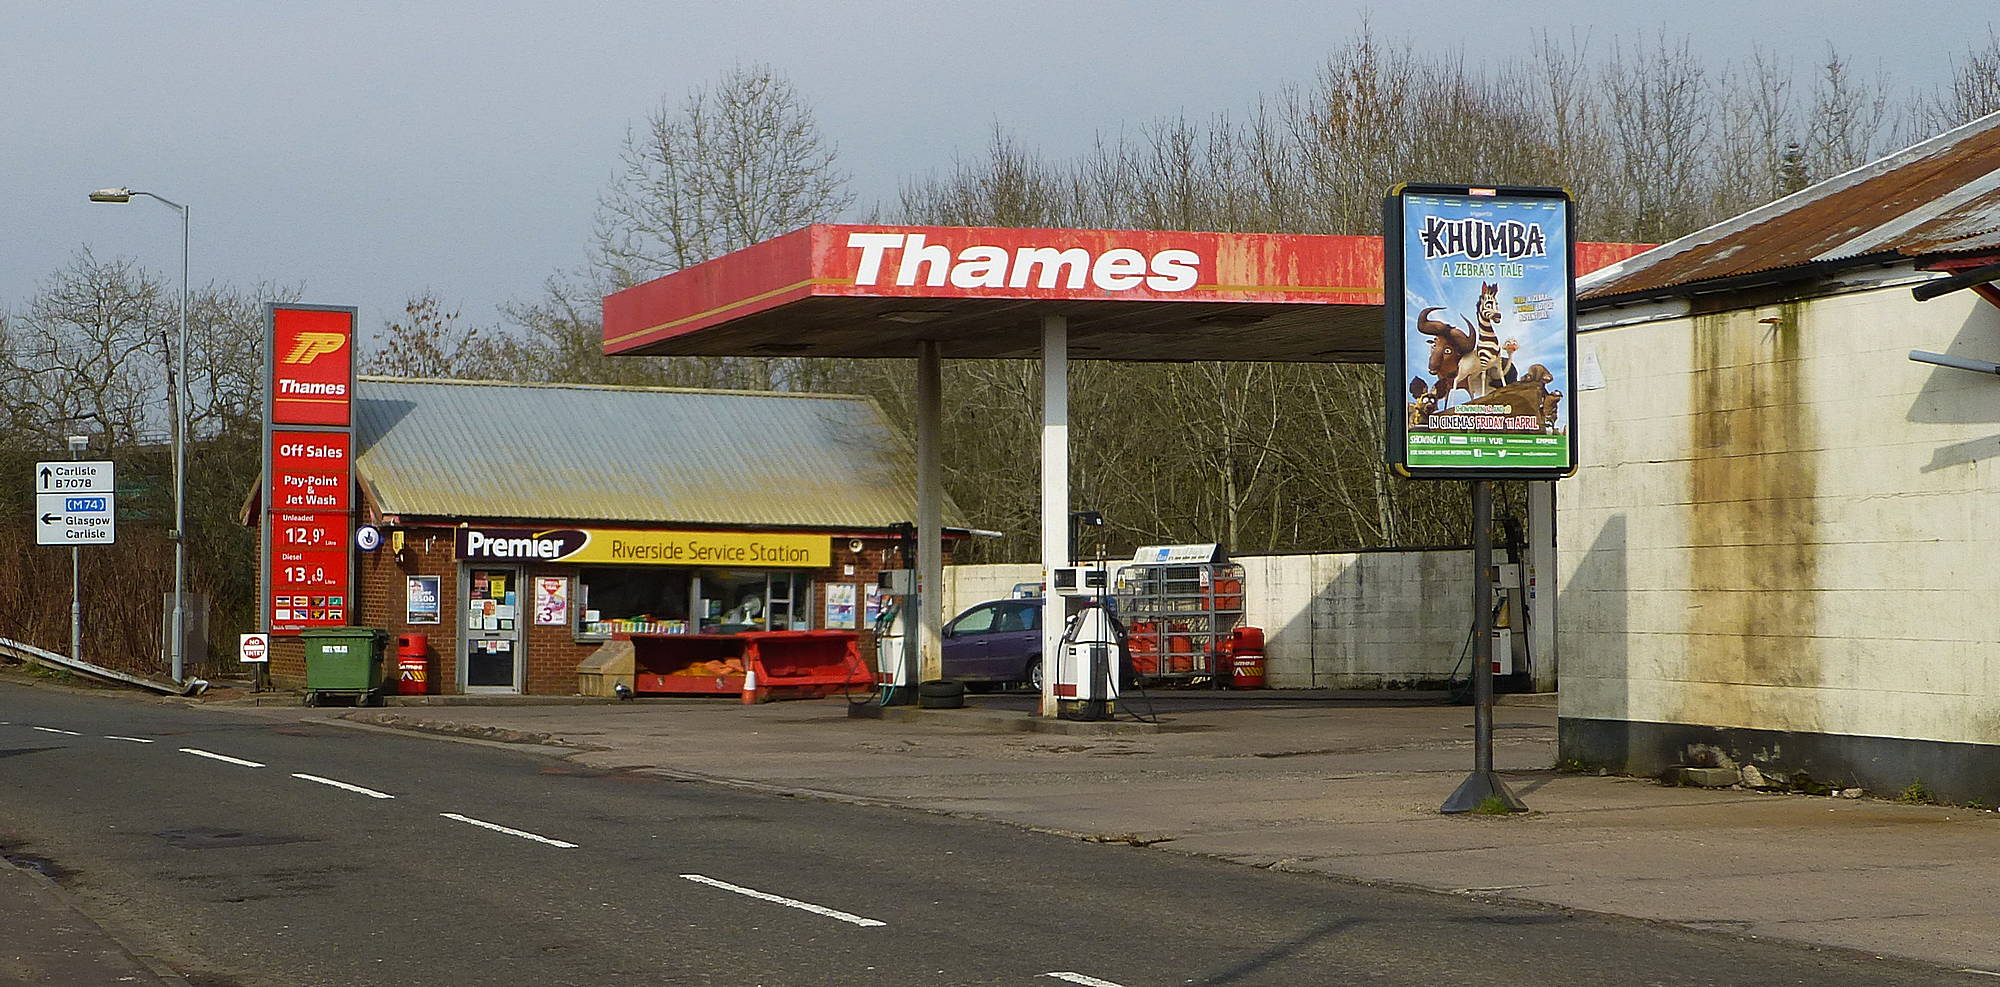 Thames petrol station in Milton